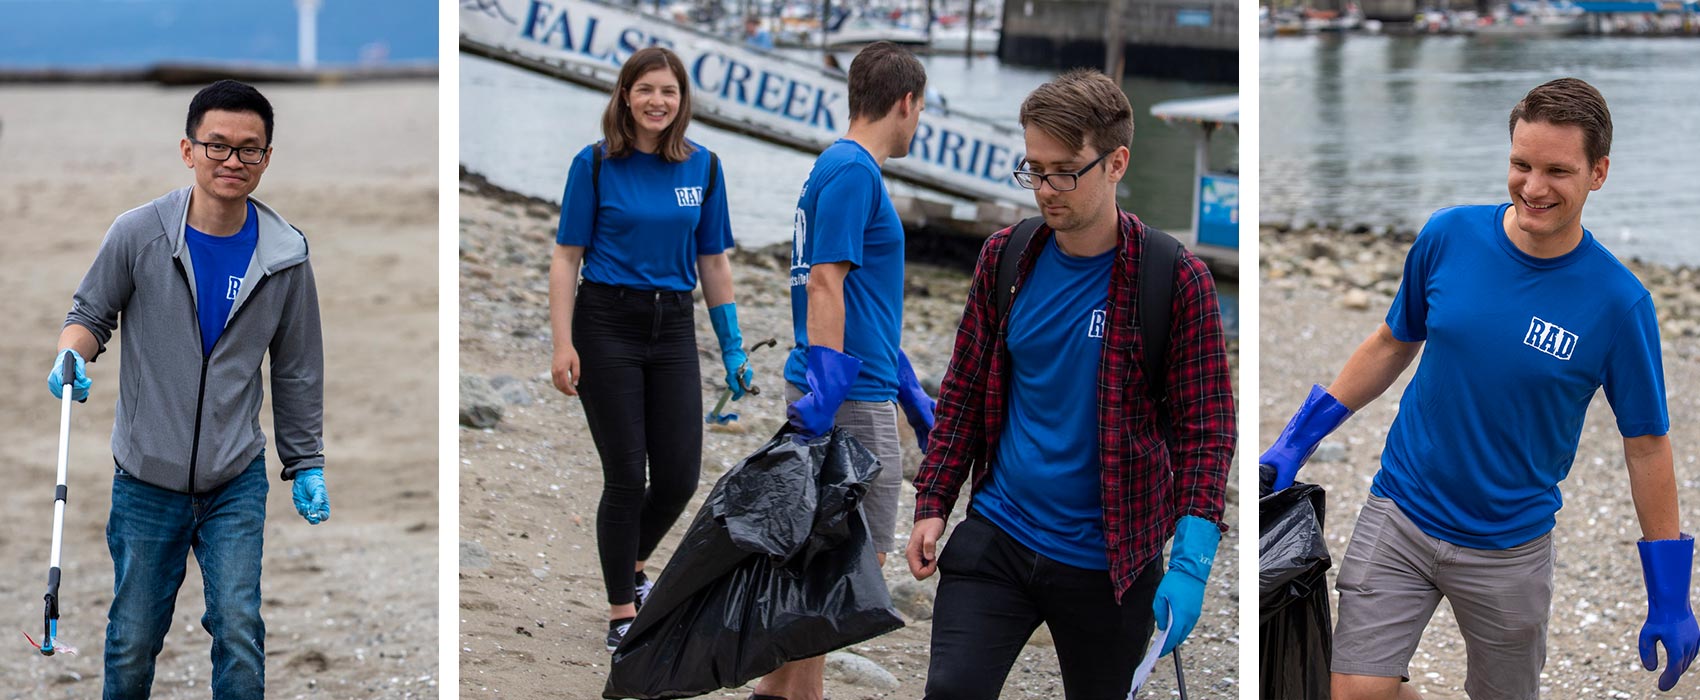 Copperleaf's RAD Initiative Participates in the Great Canadian Shoreline Cleanup | Copperleaf